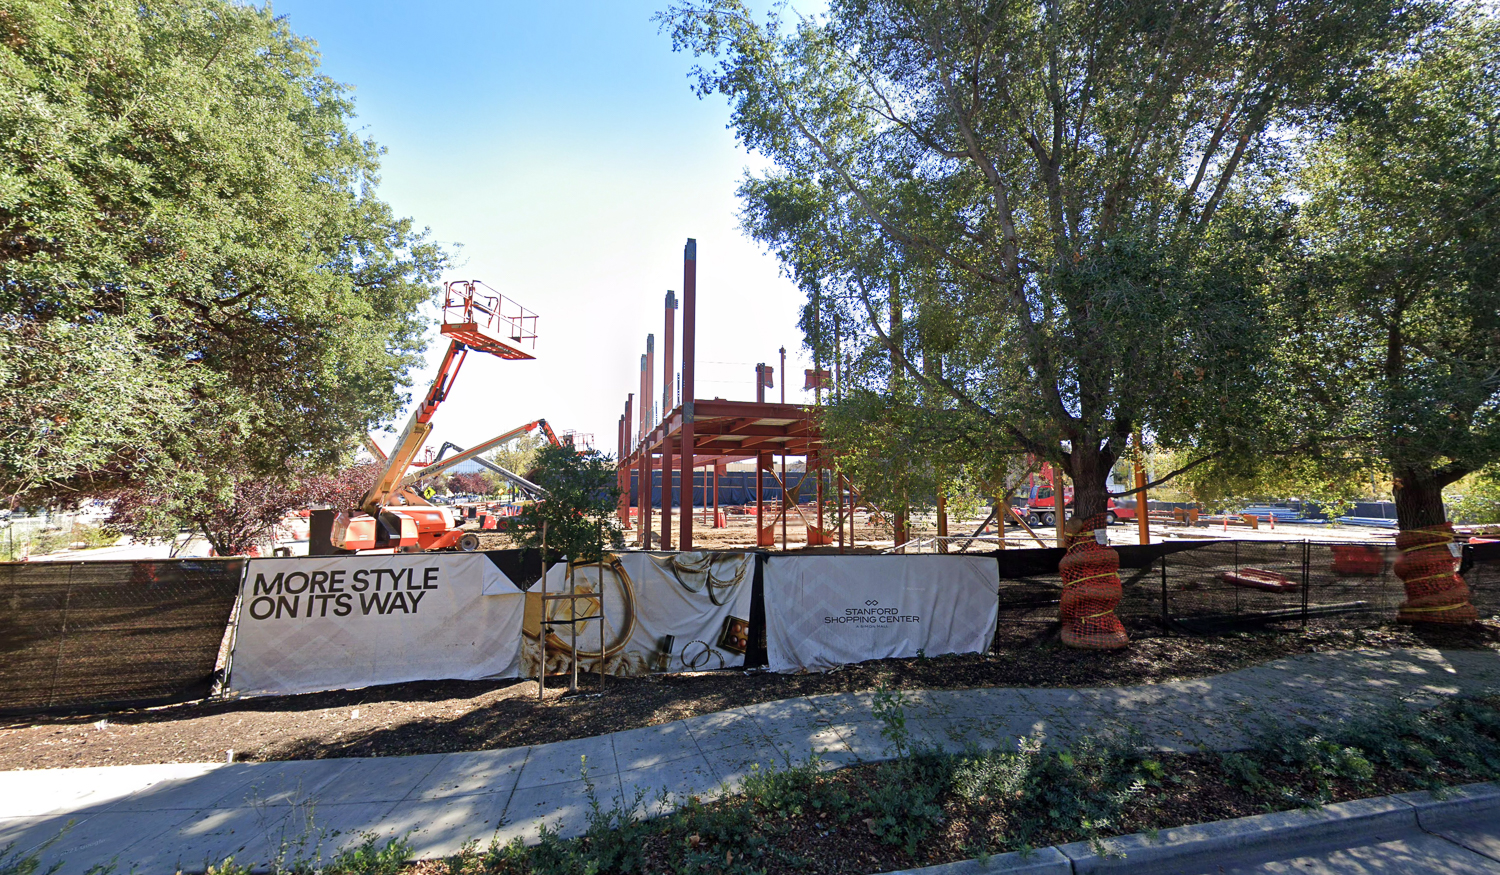 Construction at the Stanford Shopping Center, adjacent to the proposed new restaurants, image taken October 2021 via Google Street View